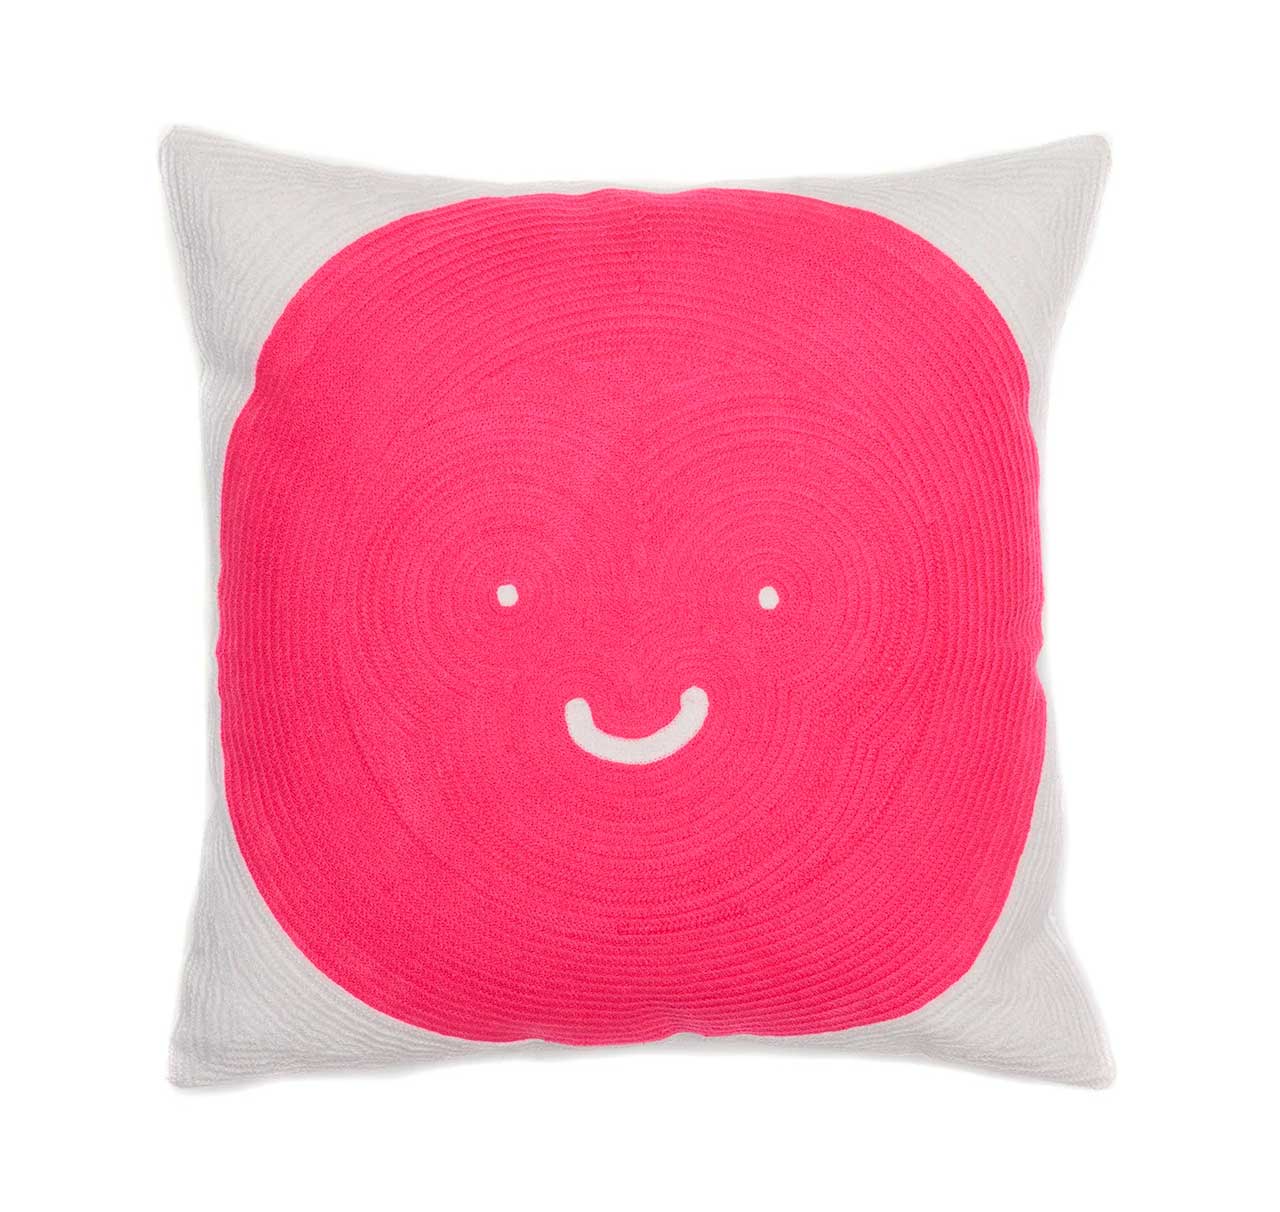 aelfie Quelle Surprise pillow cover with pink smiley face